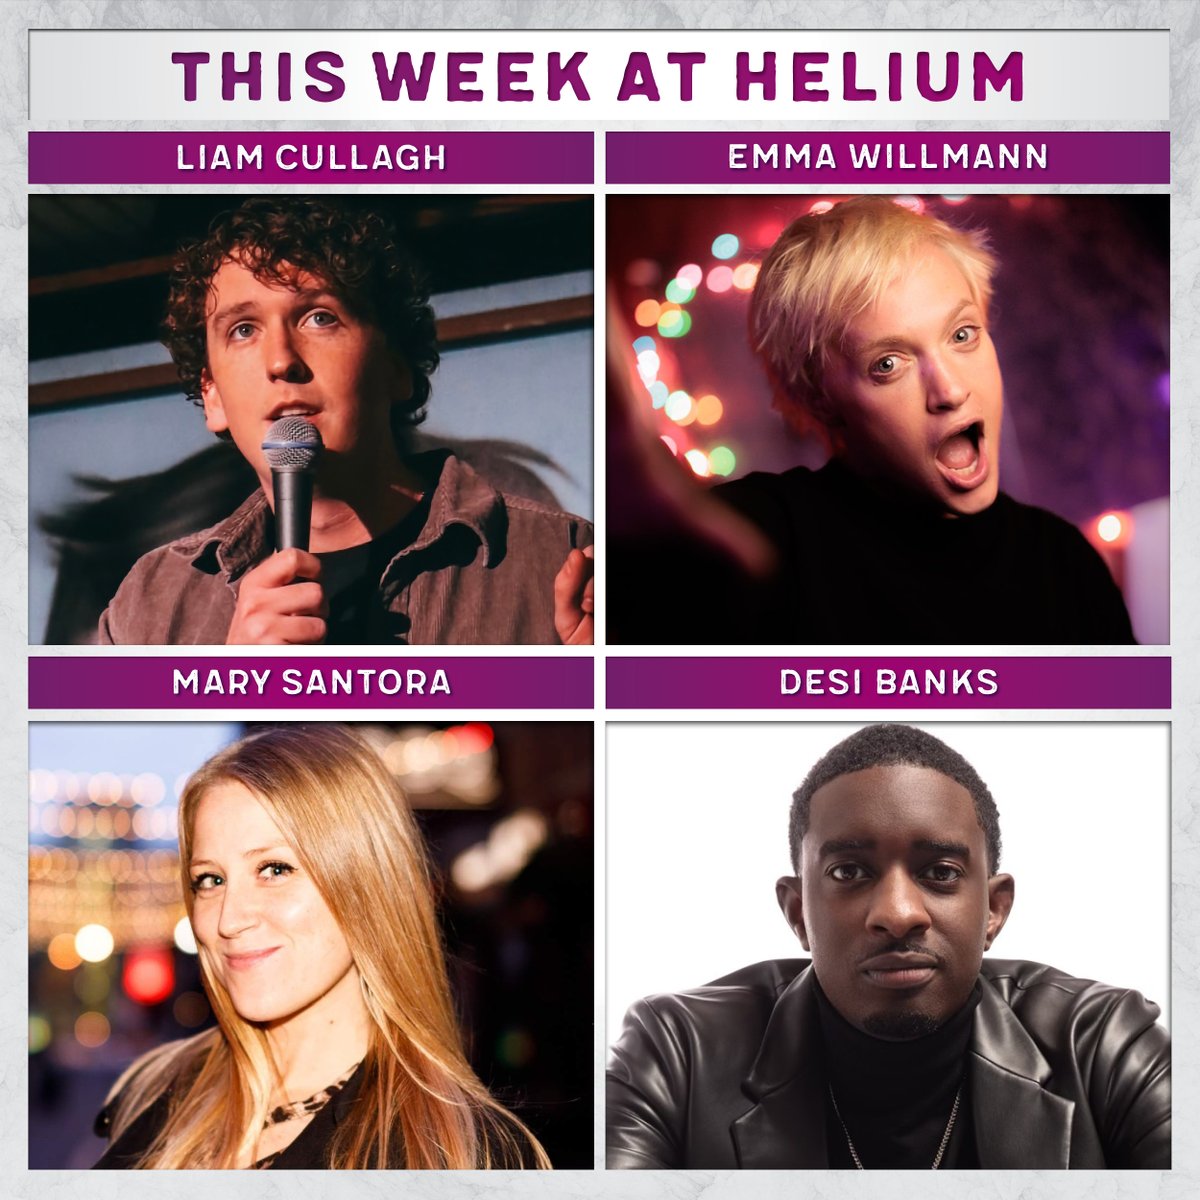 This Week at Helium | @LiamCullagh, @IamEmmaWillmann, @mary_santora will be Upstairs, + @iamdesibanks headlines the weekend! Grab tickets now: bit.ly/3QzPDCy